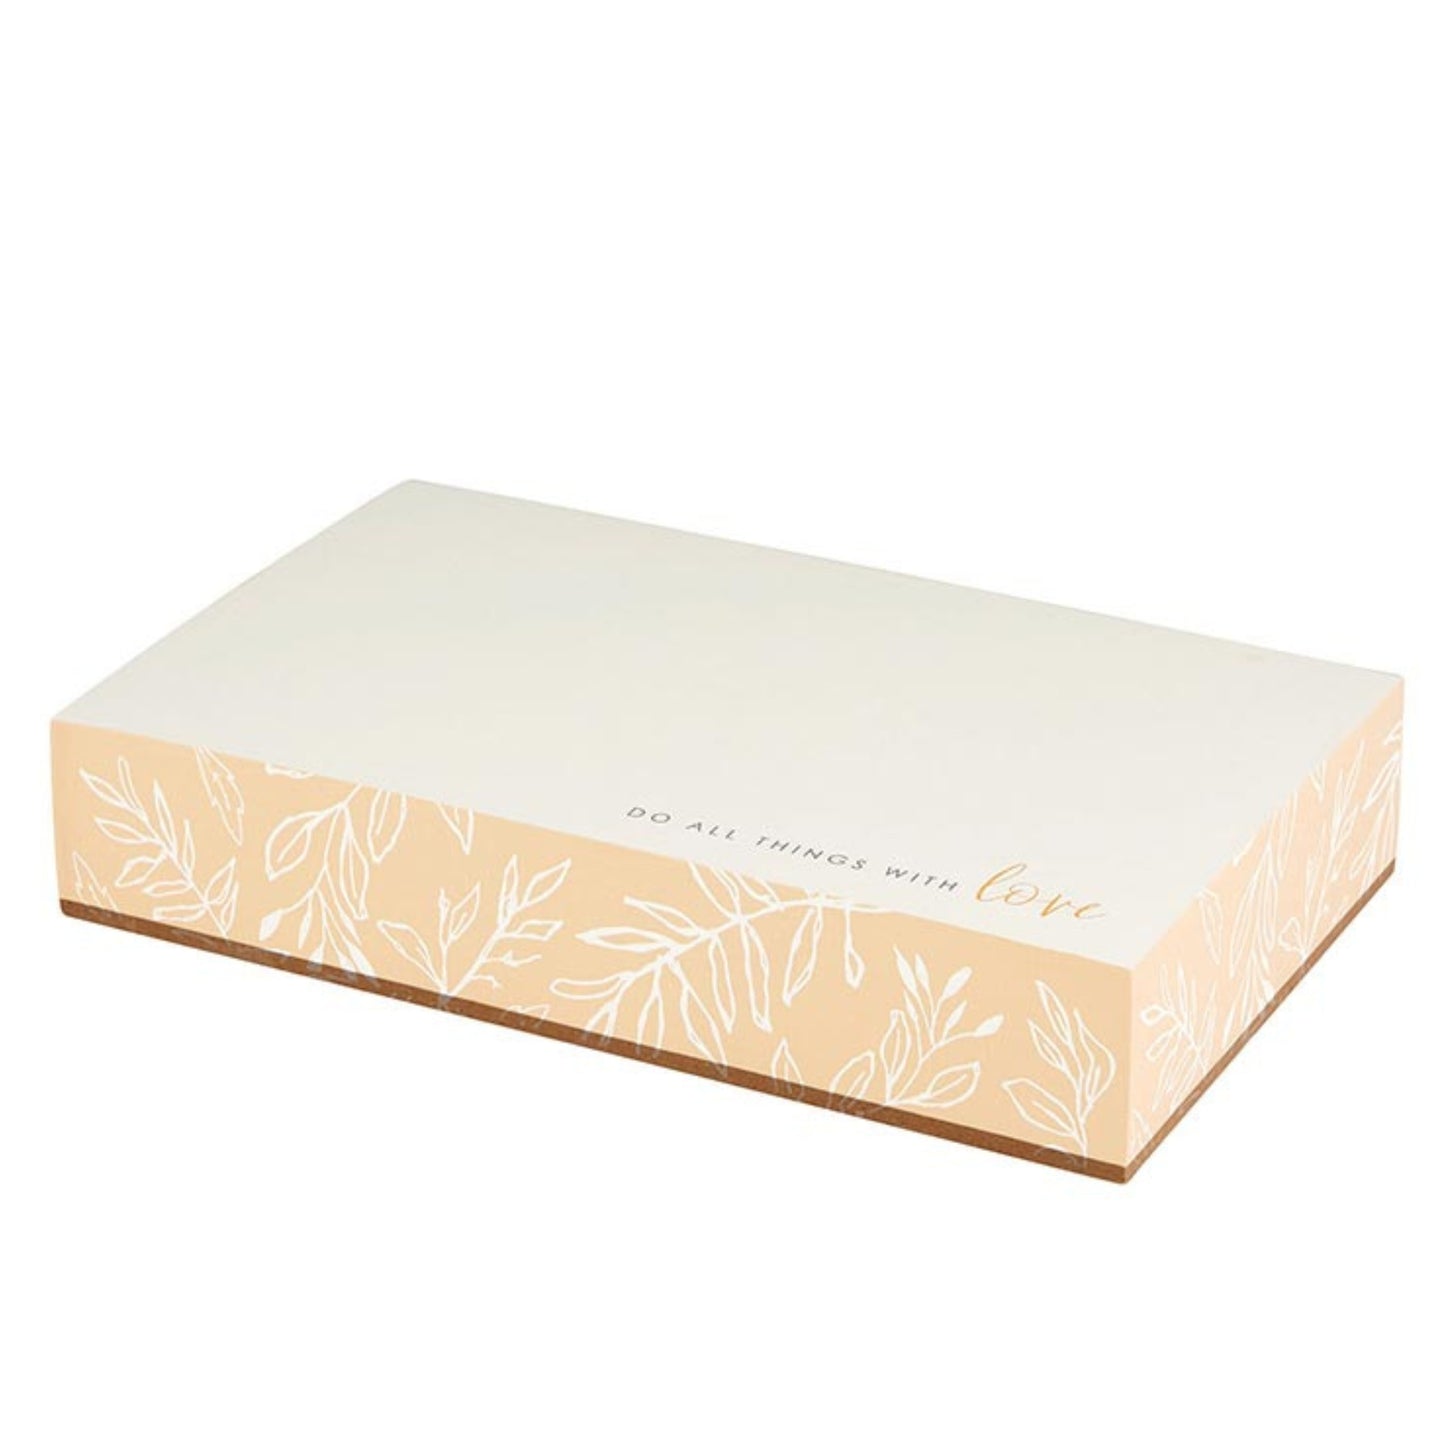 Paper Block Notepad - Do All Things In Love | Premium Paper Large Notepad with Peach and White Art Design | oak7west.com